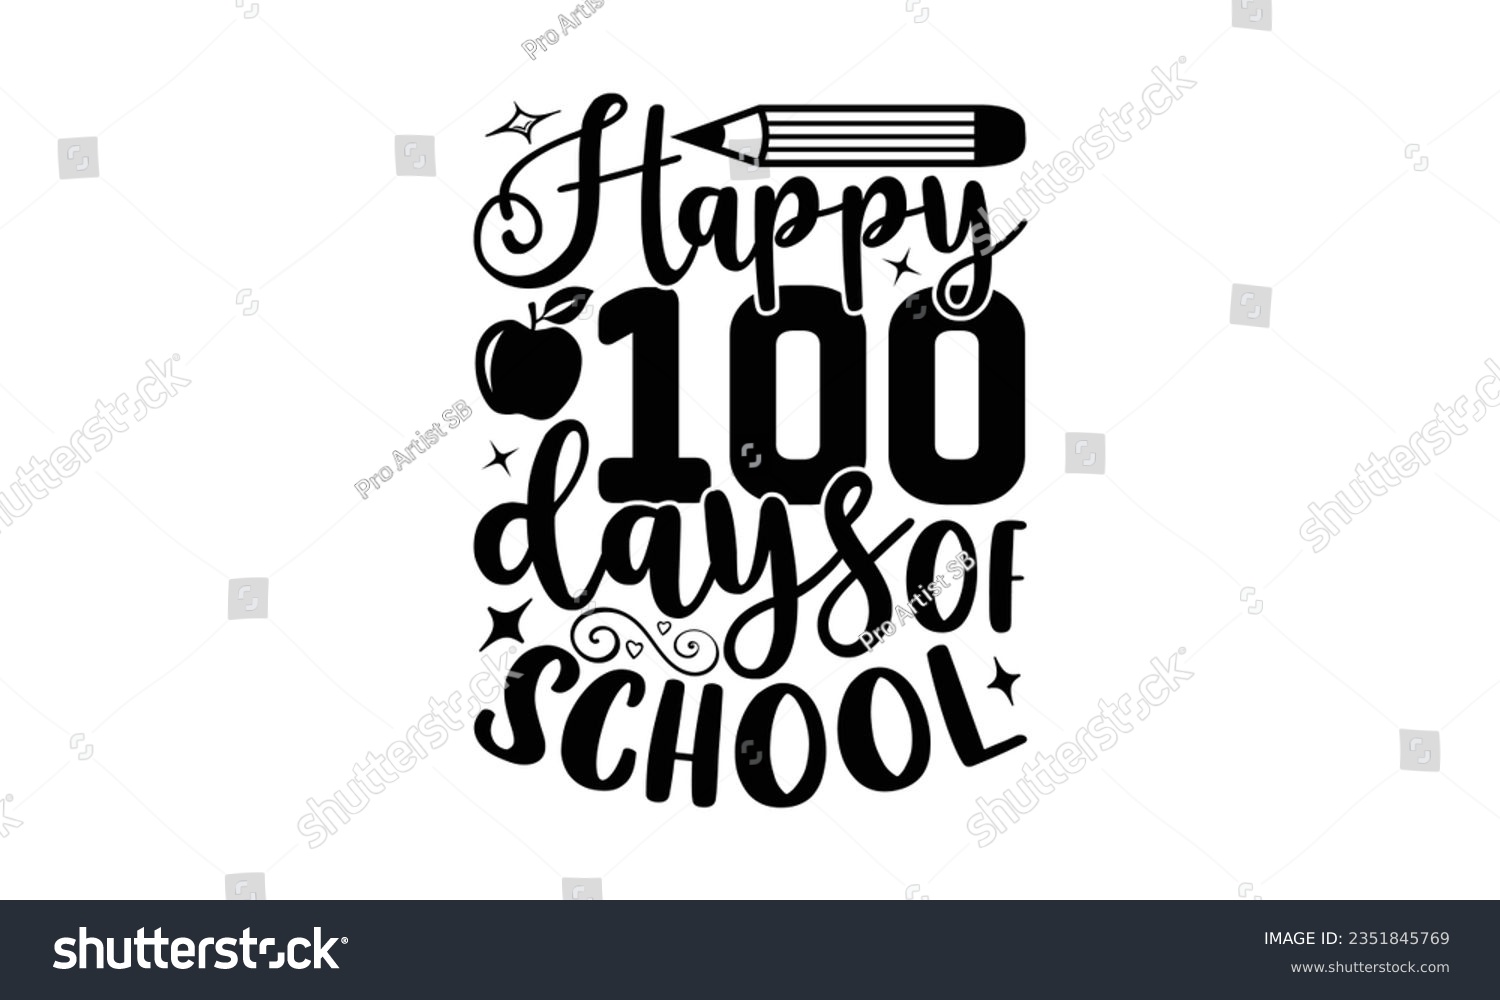 SVG of Happy 100 days of school - School SVG Design Sublimation, Back To School Quotes, Calligraphy Graphic Design, Typography Poster with Old Style Camera and Quote. svg